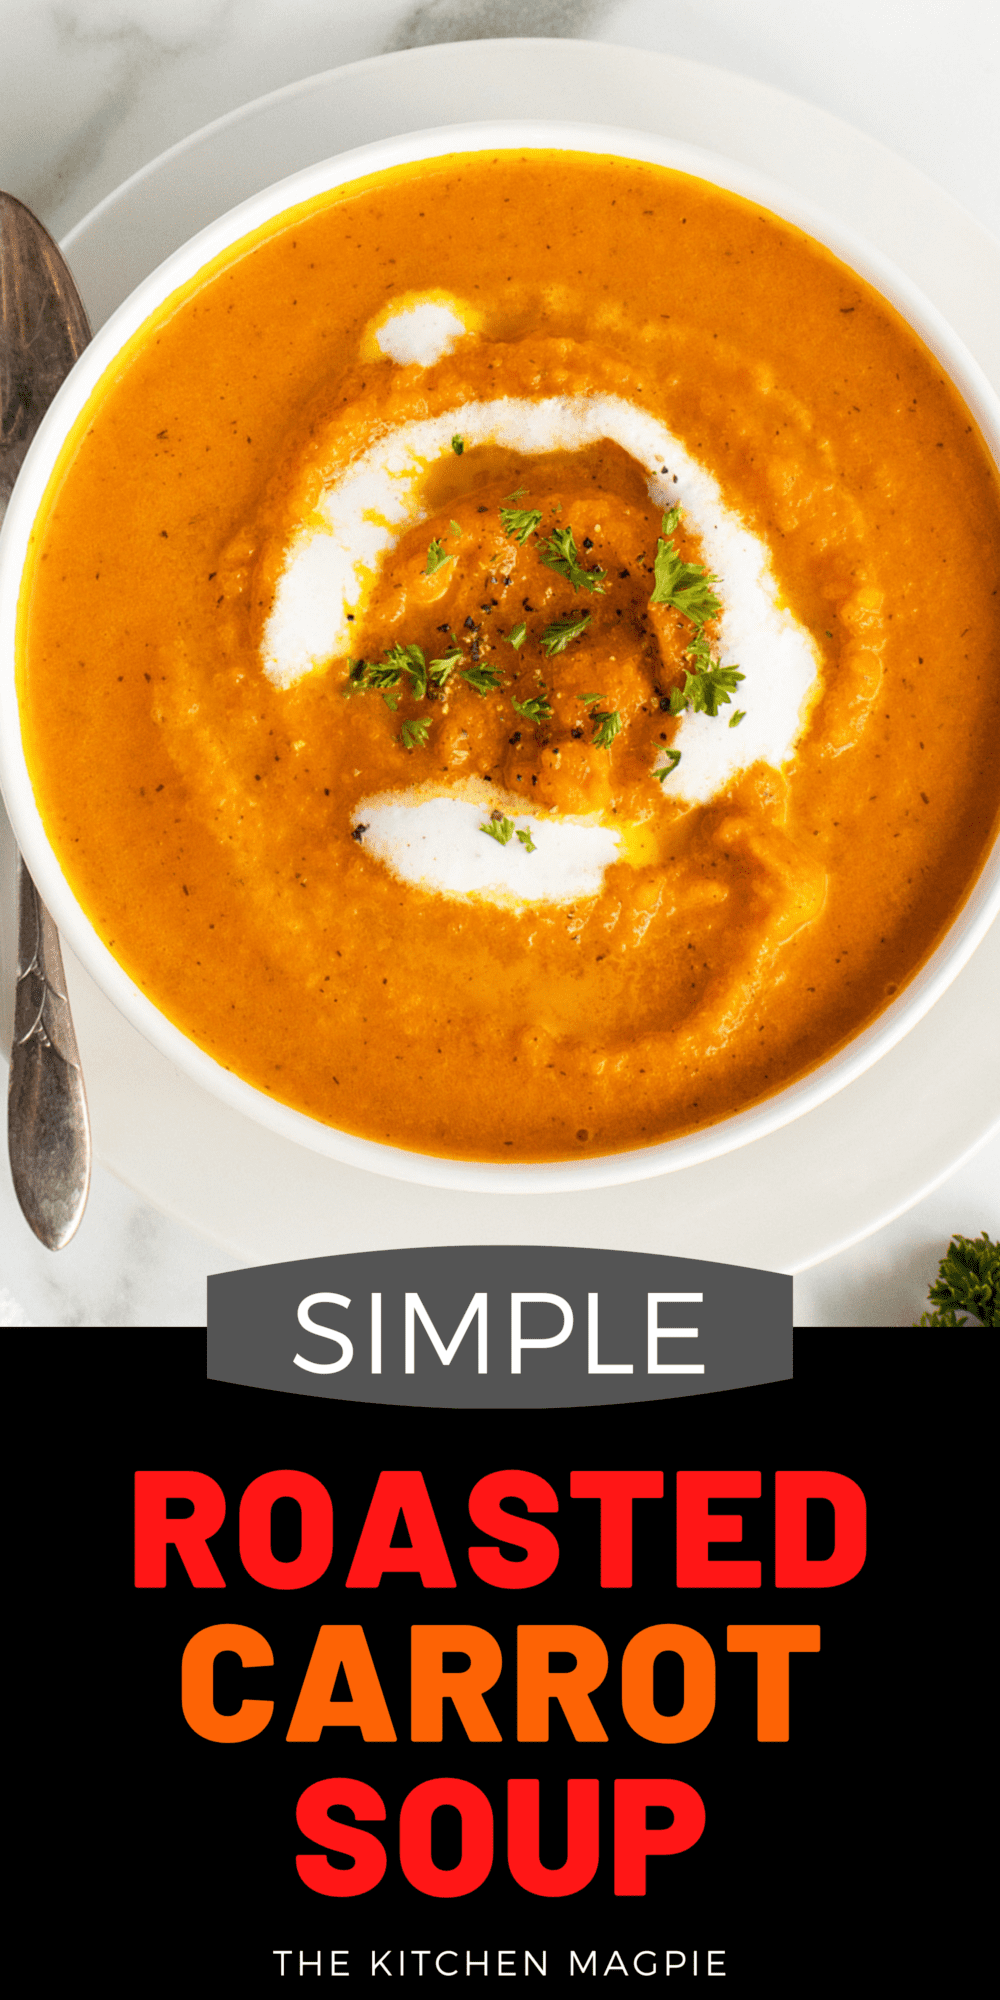 Carrots are great as a side dish, they are even better when lightly roasted and turned into this delicious roasted carrot soup.